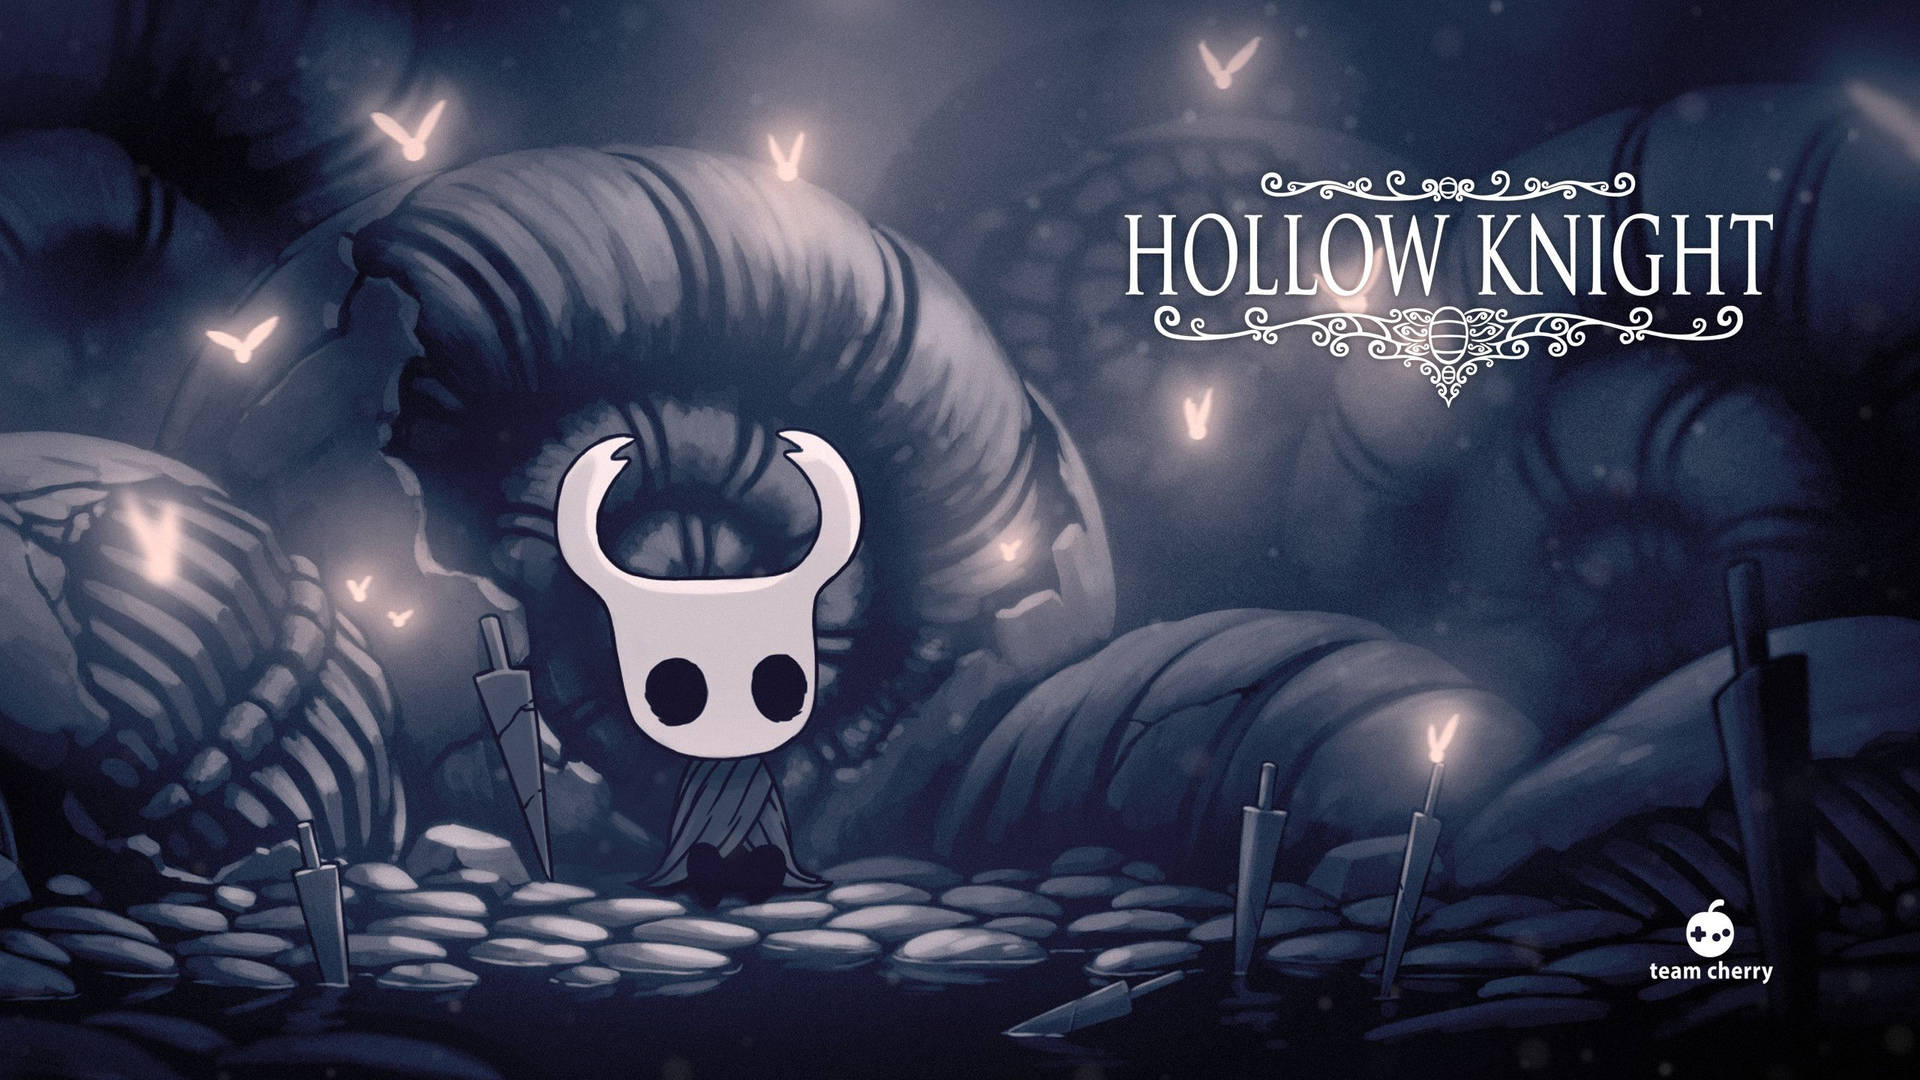 Cool Poster Of Hollow Knight